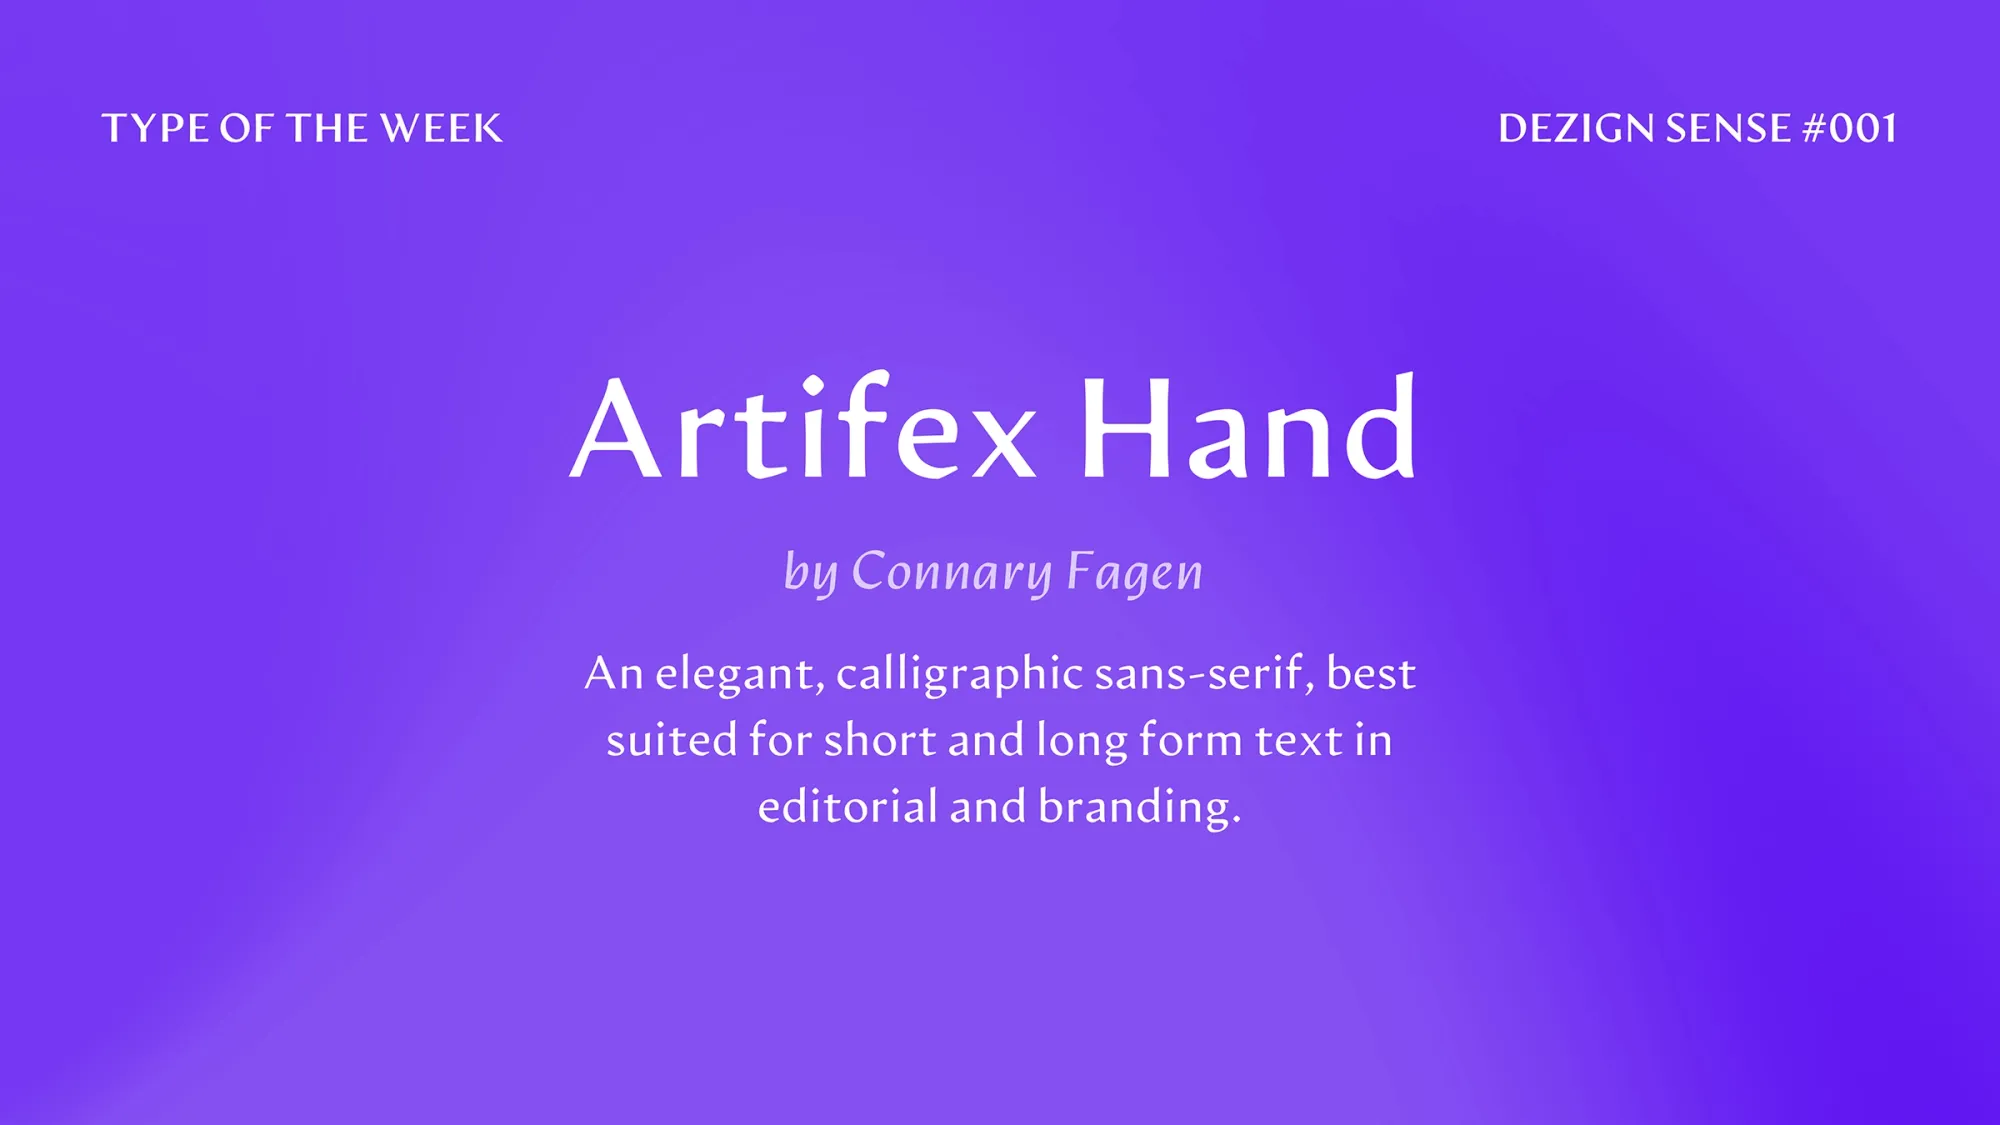 Graphic with centered text. The title is Artifex Hand with subtitle "by Connery Fagen". Description says "An elegant, calligraphic sans-serif, best suited for short and long form text in editorial and branding."